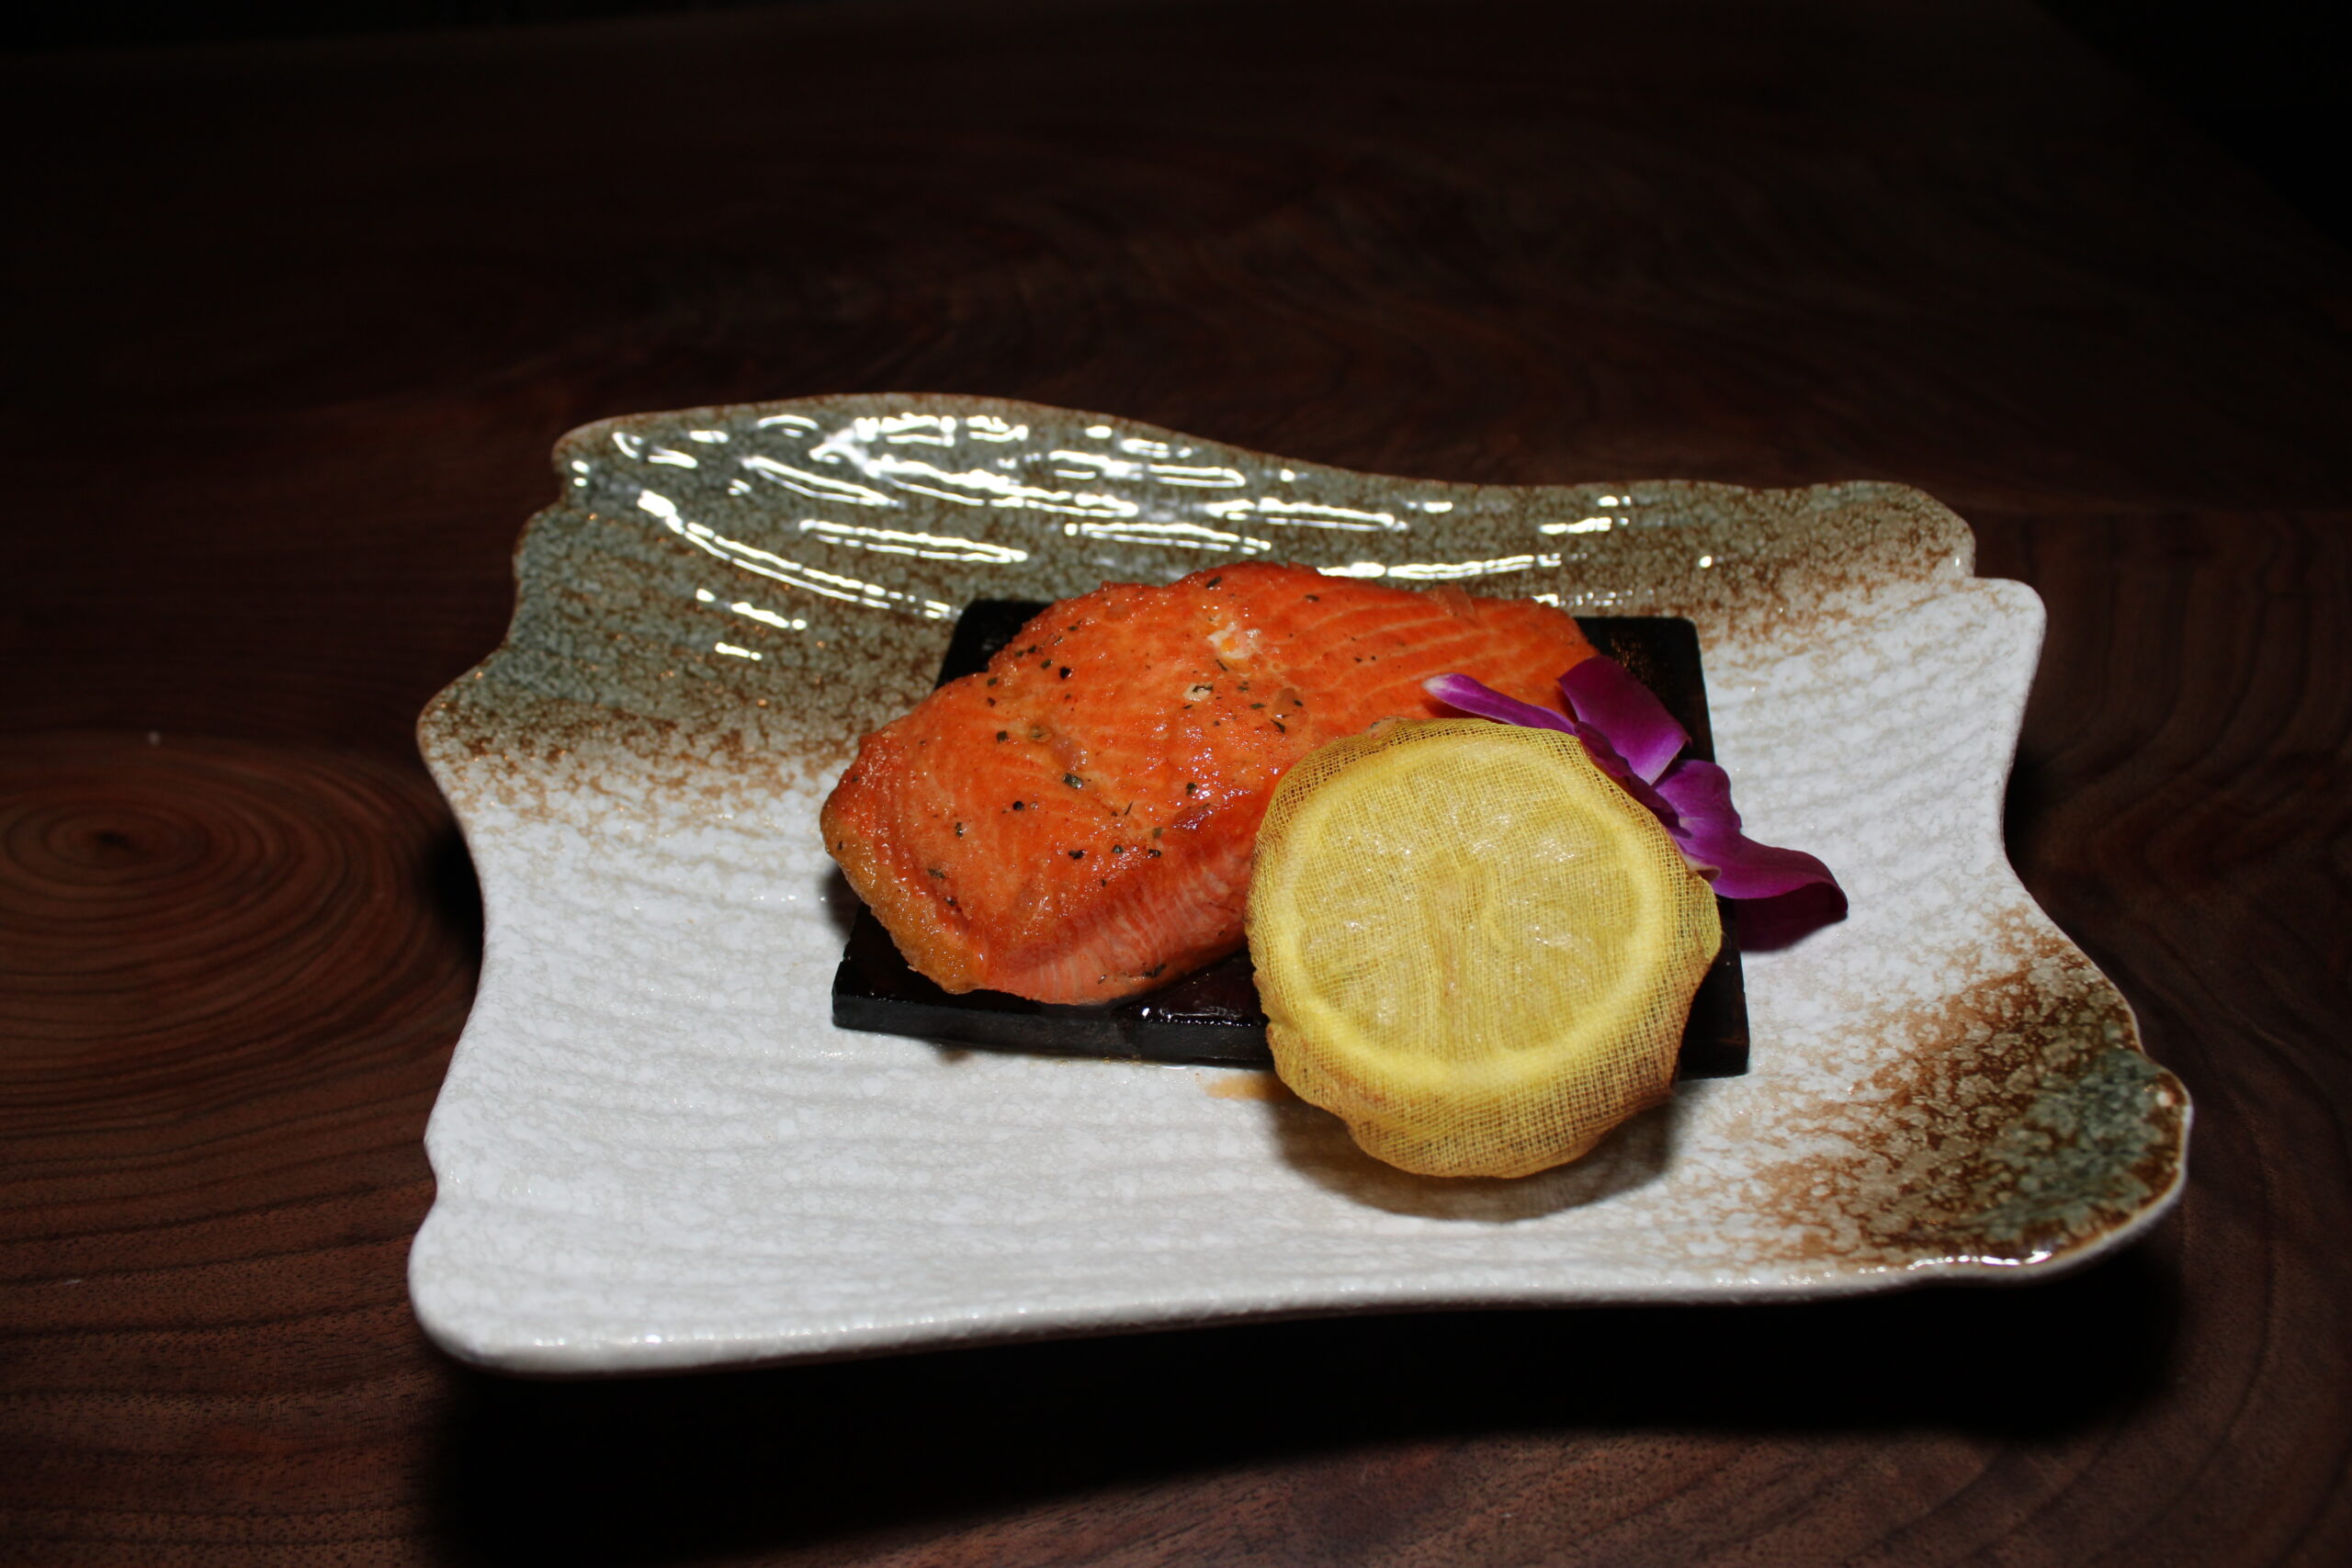 Image of a plated salmon filet on a wood plank with half a lemon